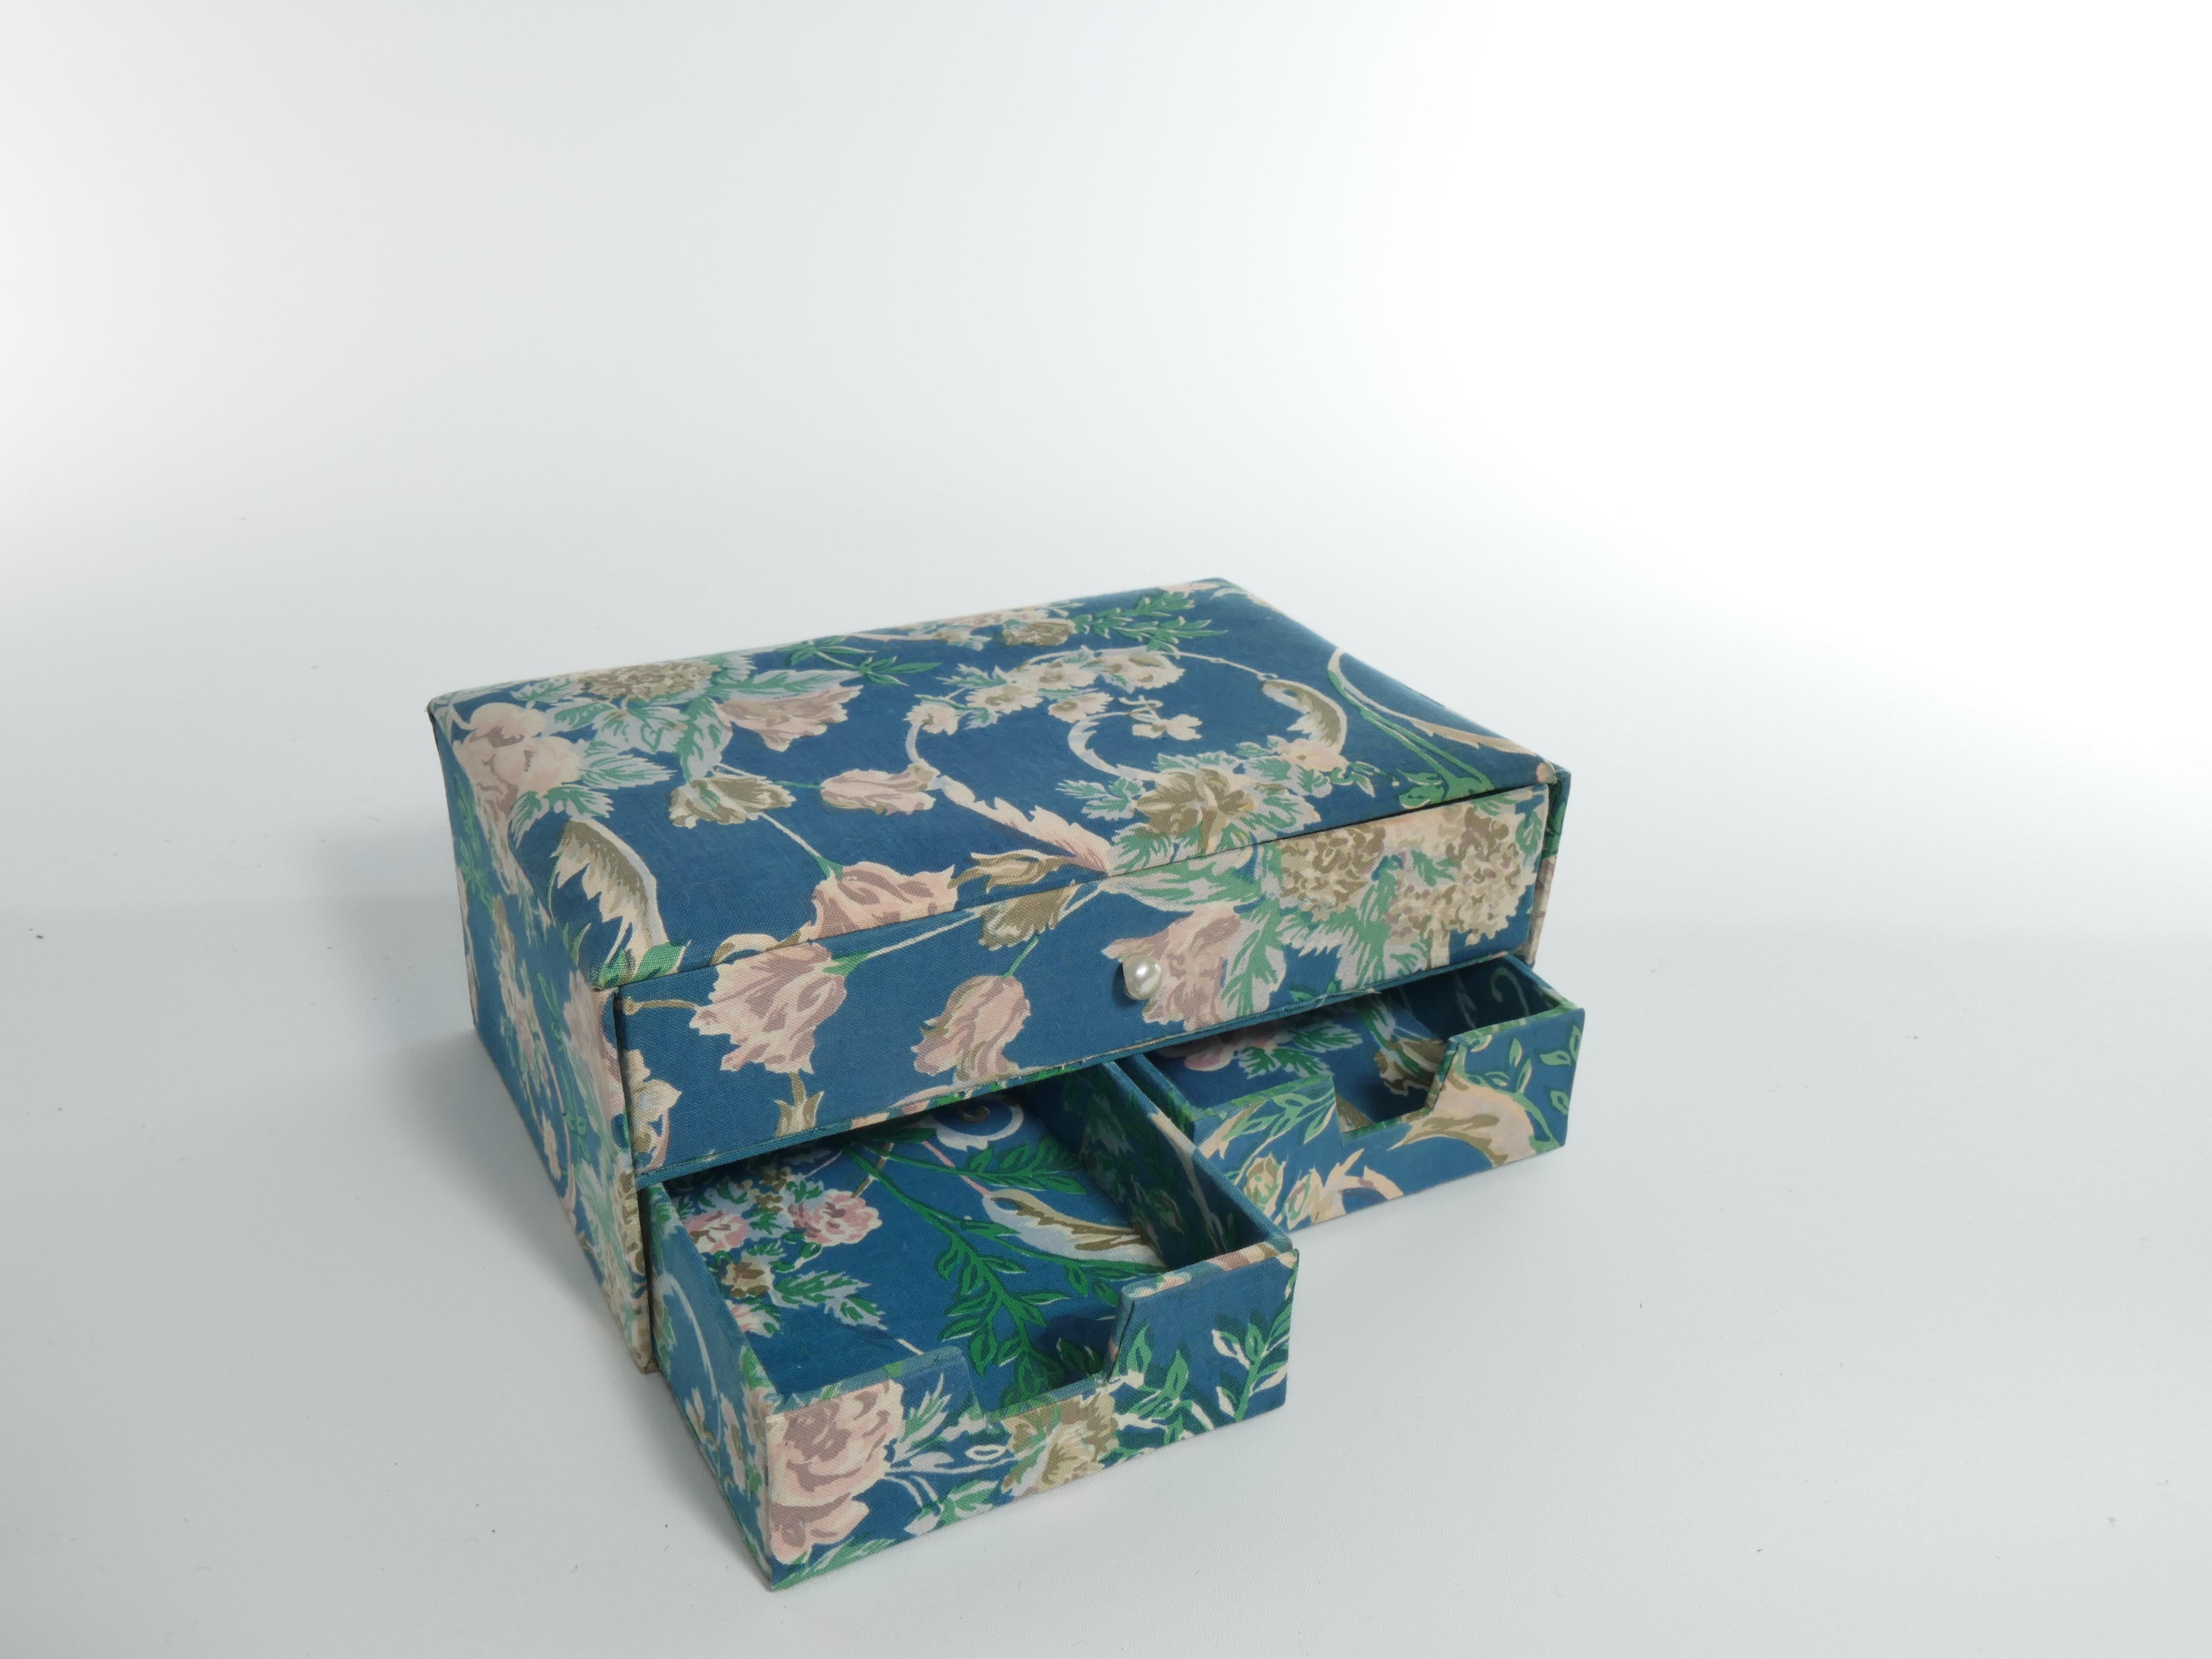 Vintage Jewelry Box in Blue Textile With Floral Motifs For Sale 4